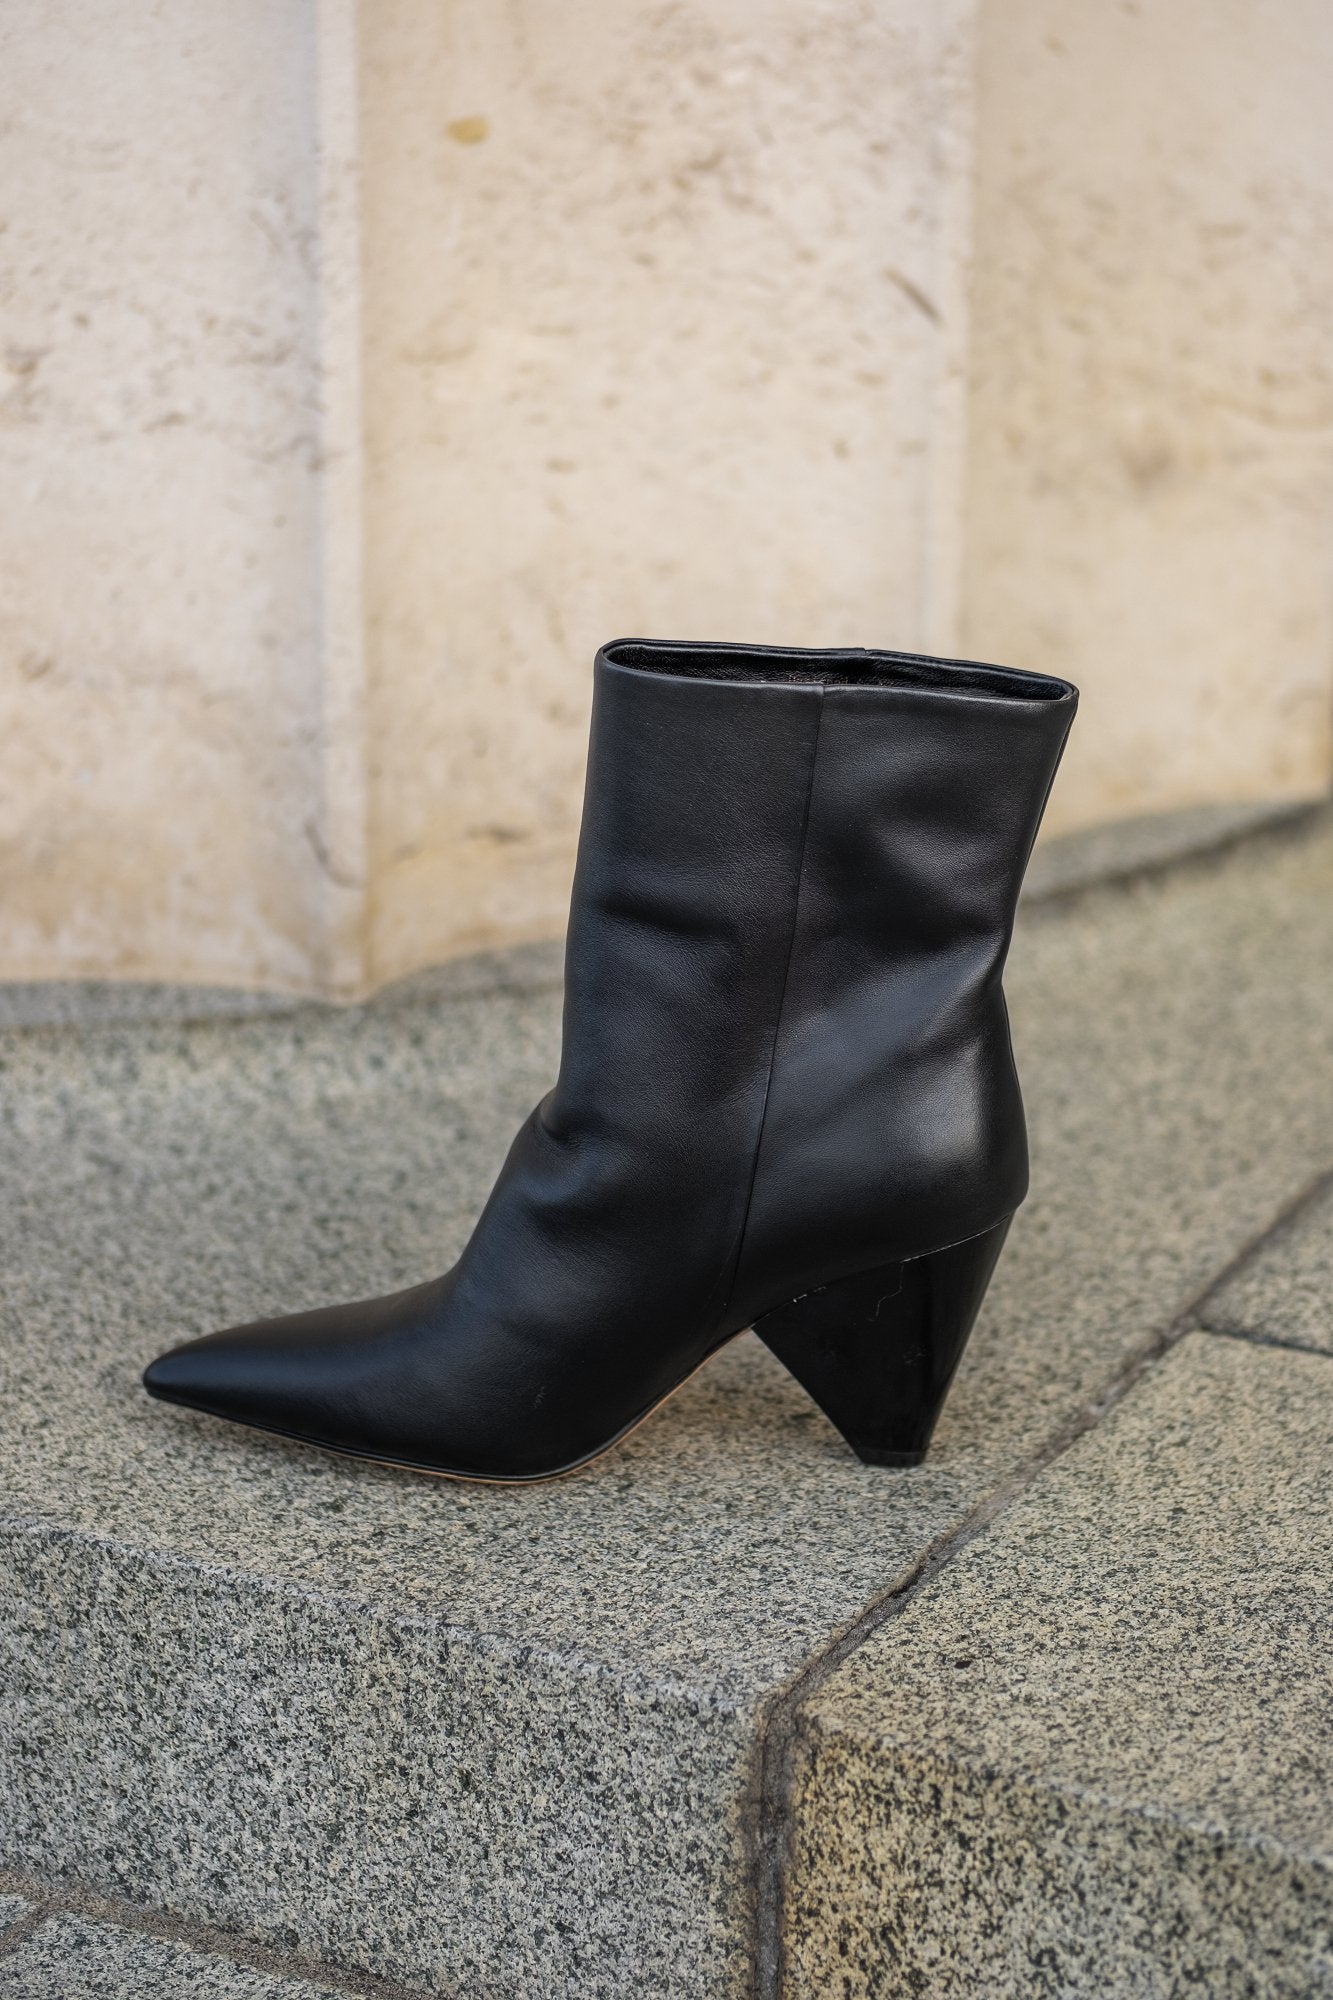 Tony Wedge Heel Boot Black Boots by Sole Shoes NZ AB18-36